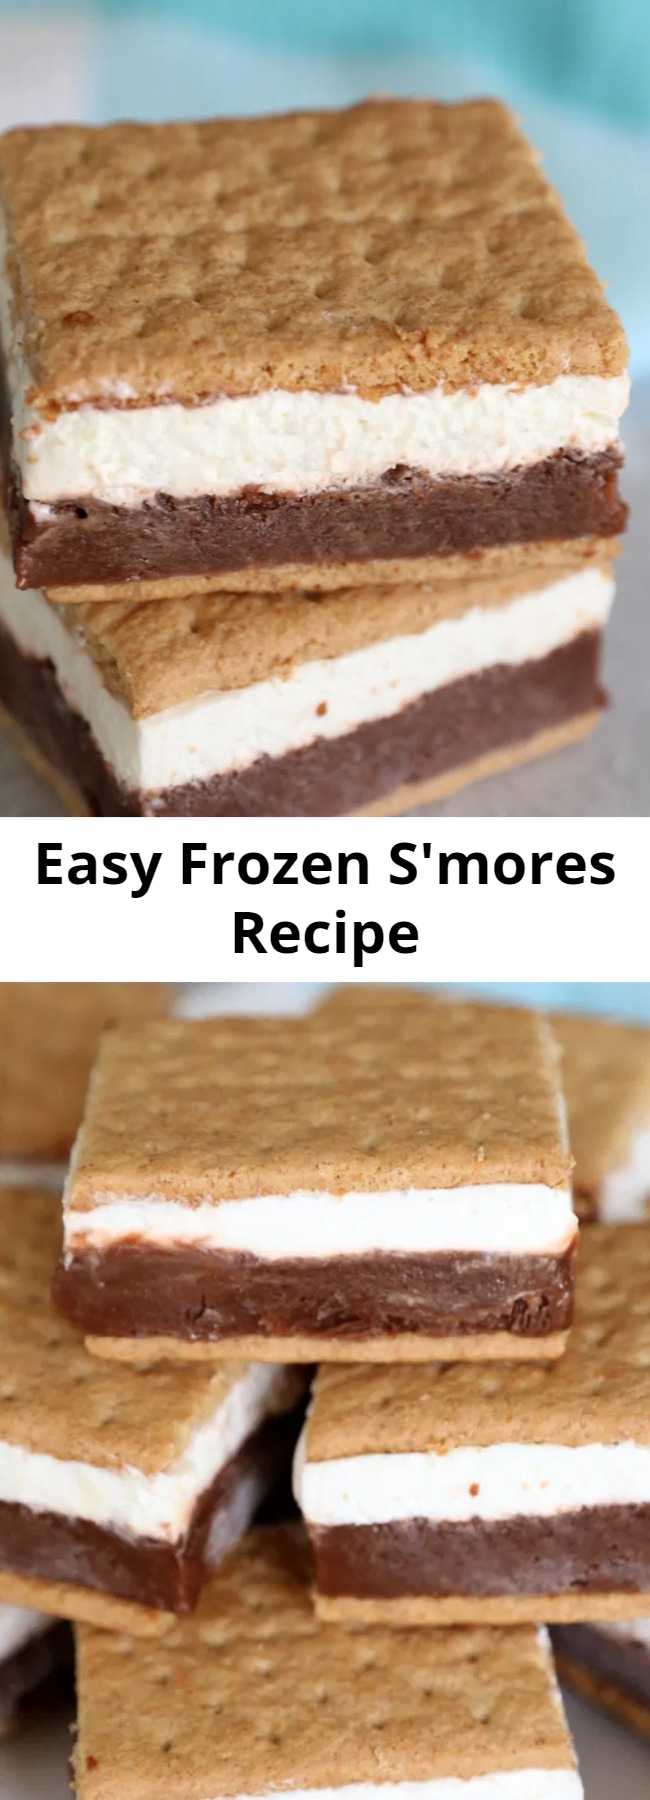 Easy Frozen S'mores Recipe - Layers of chocolate pudding and marshmallow creme make these frozen s'mores the best way to enjoy a s'more on a hot summer day! #smores